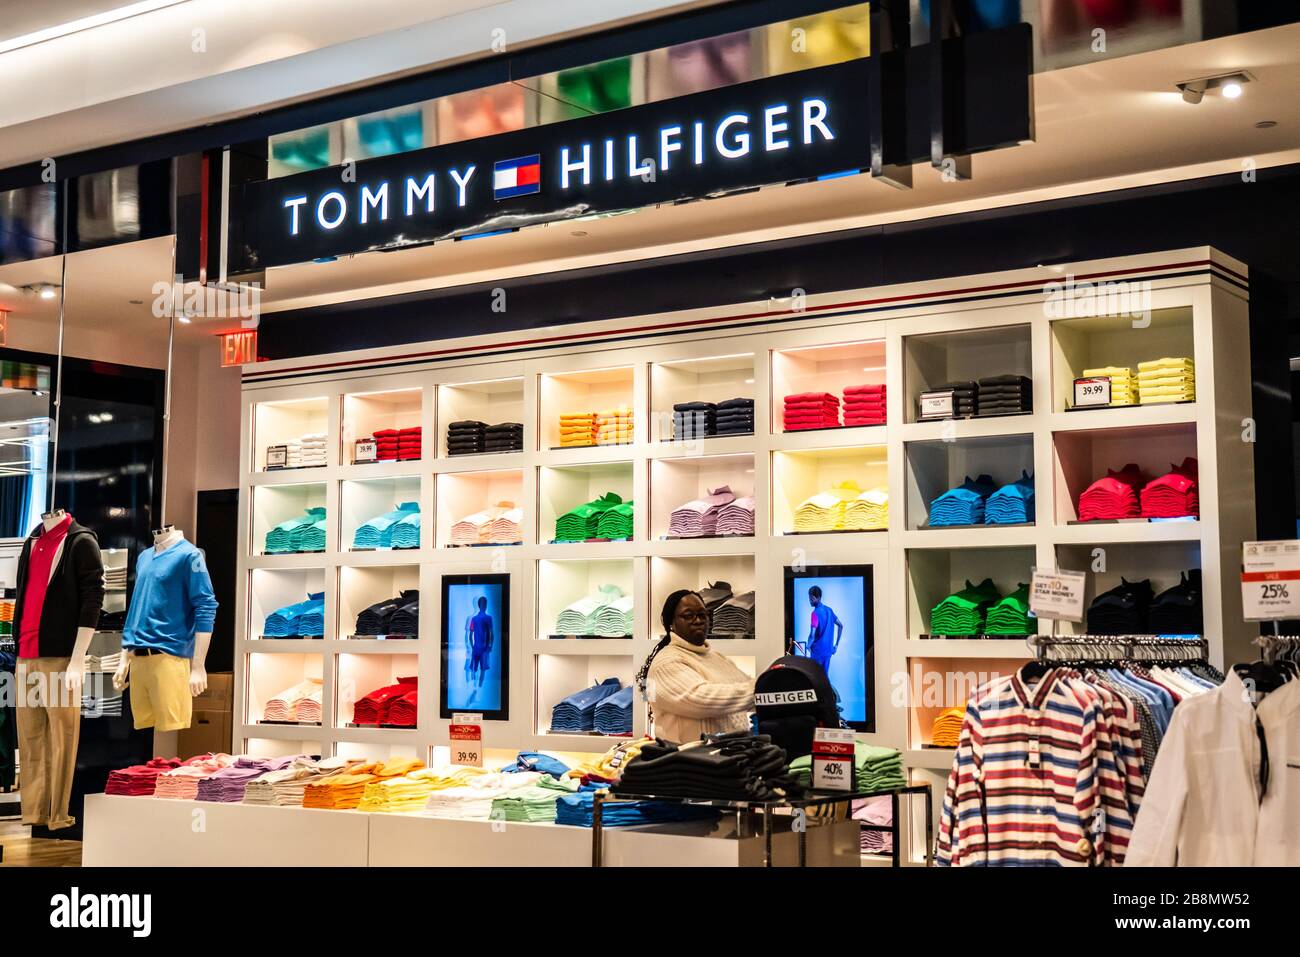 tommy hilfiger department stores